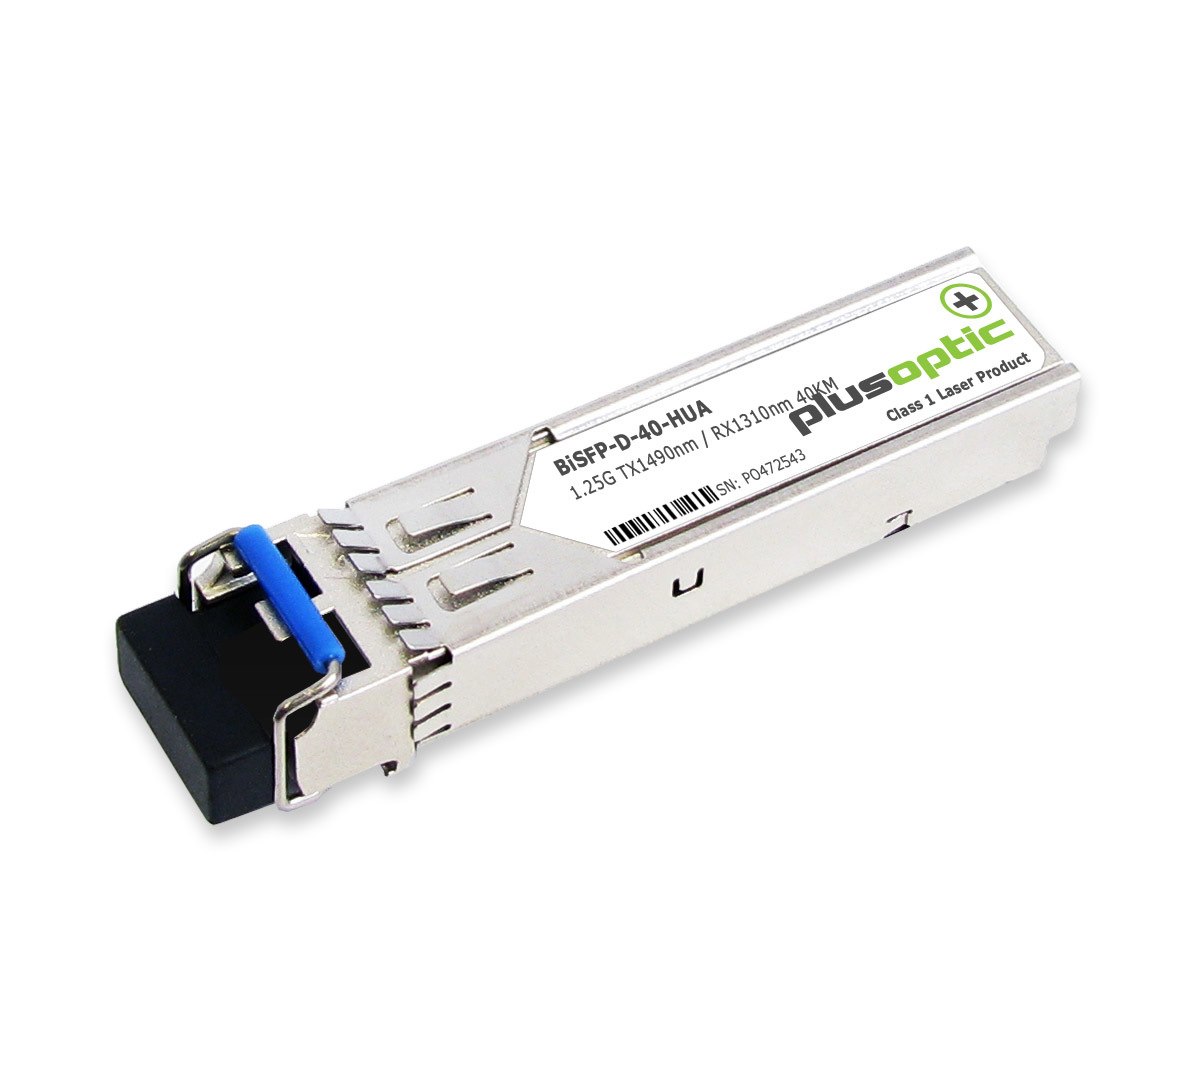 PlusOptic Huawei Compatible 1.25G, BiDi SFP, TX1490nm / RX1310nm, 40KM Transceiver, LC Connector For SMF With Dom | PlusOptic Bisfp-D-40-Hua